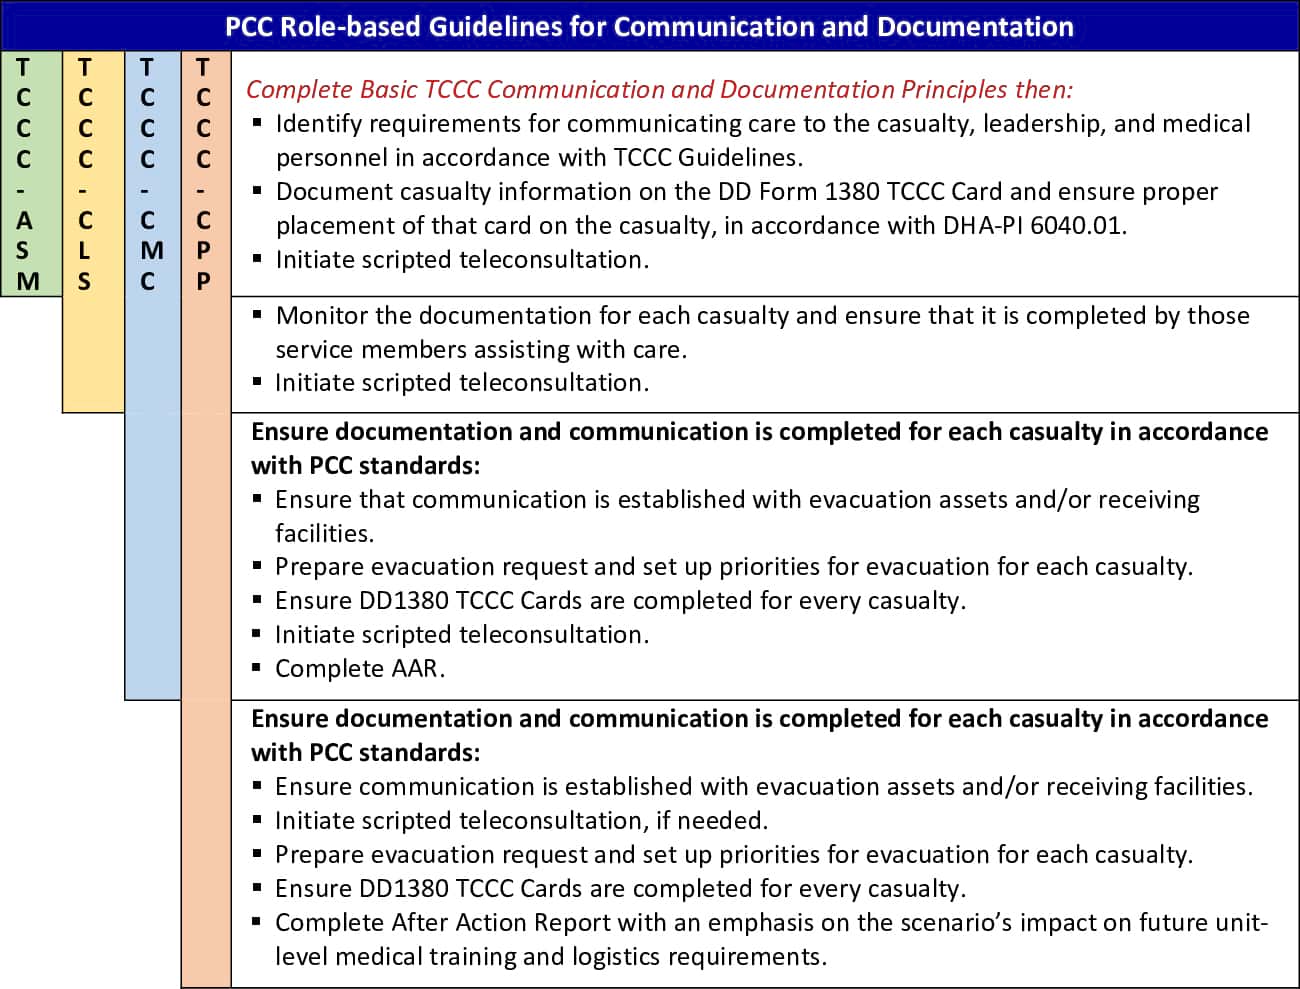 PCC Role-based Guidelines for Communications and Documentation